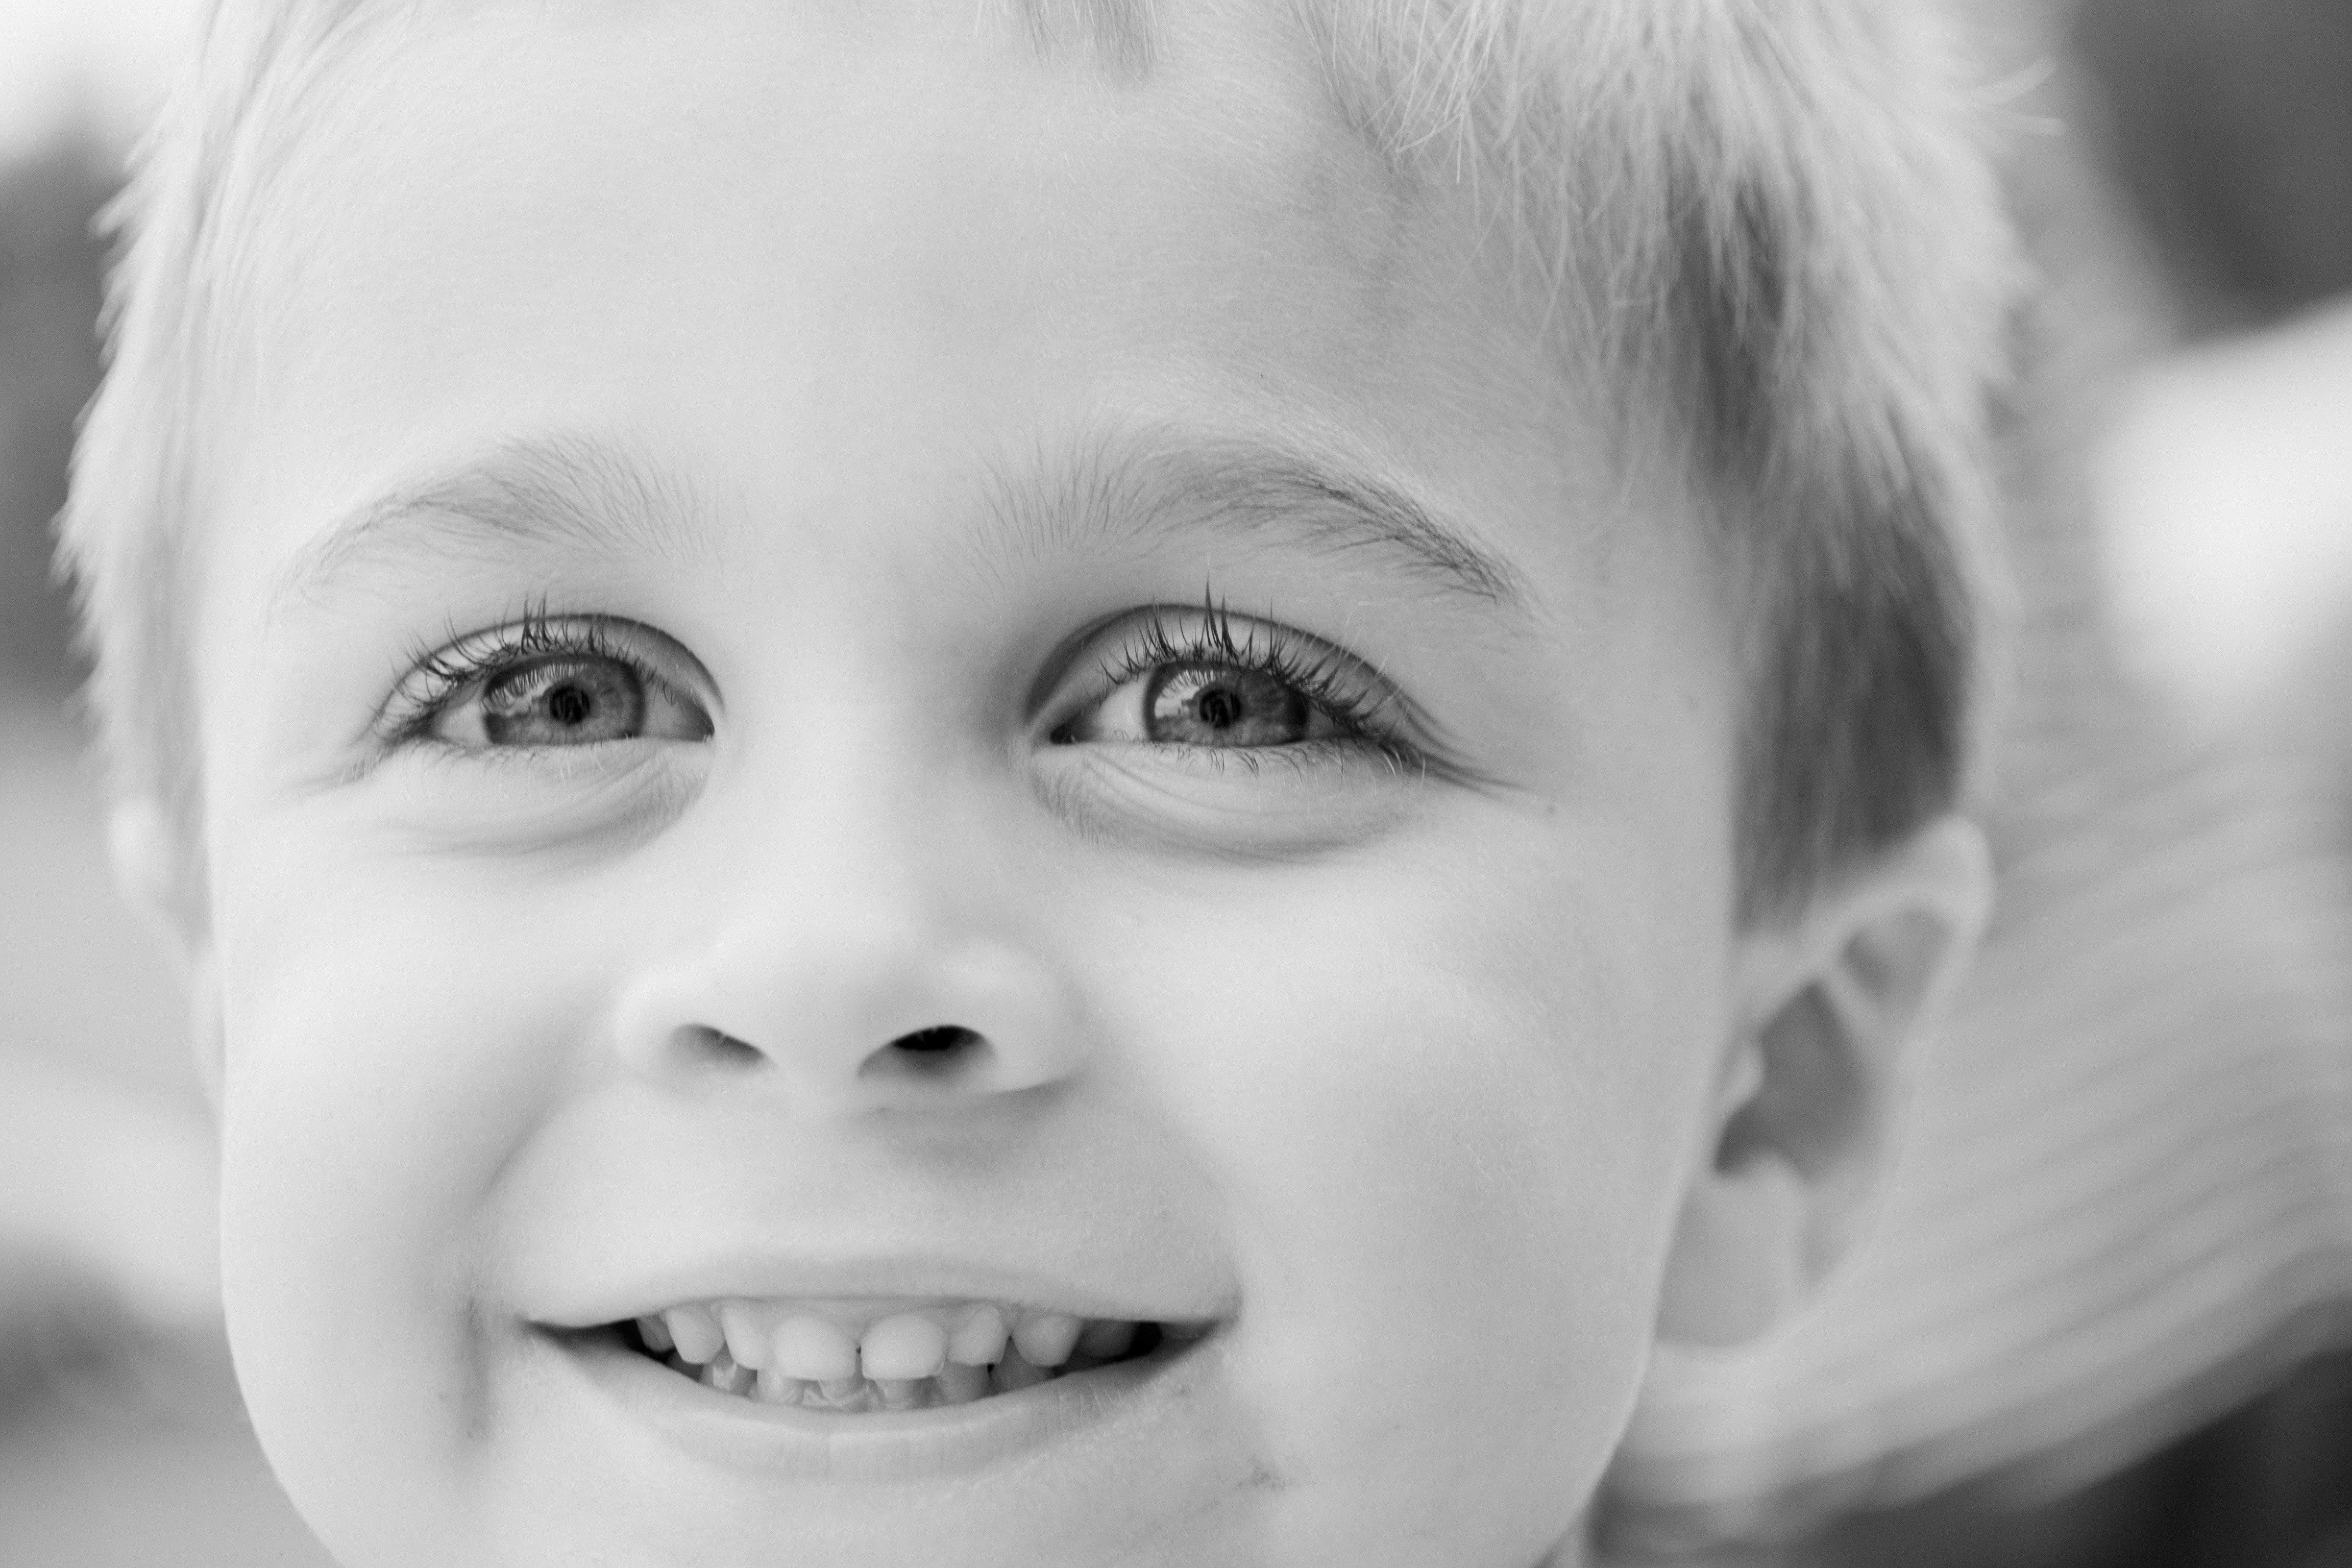 Little Louie was delighted after reading his letter from God. | Source: Pexels